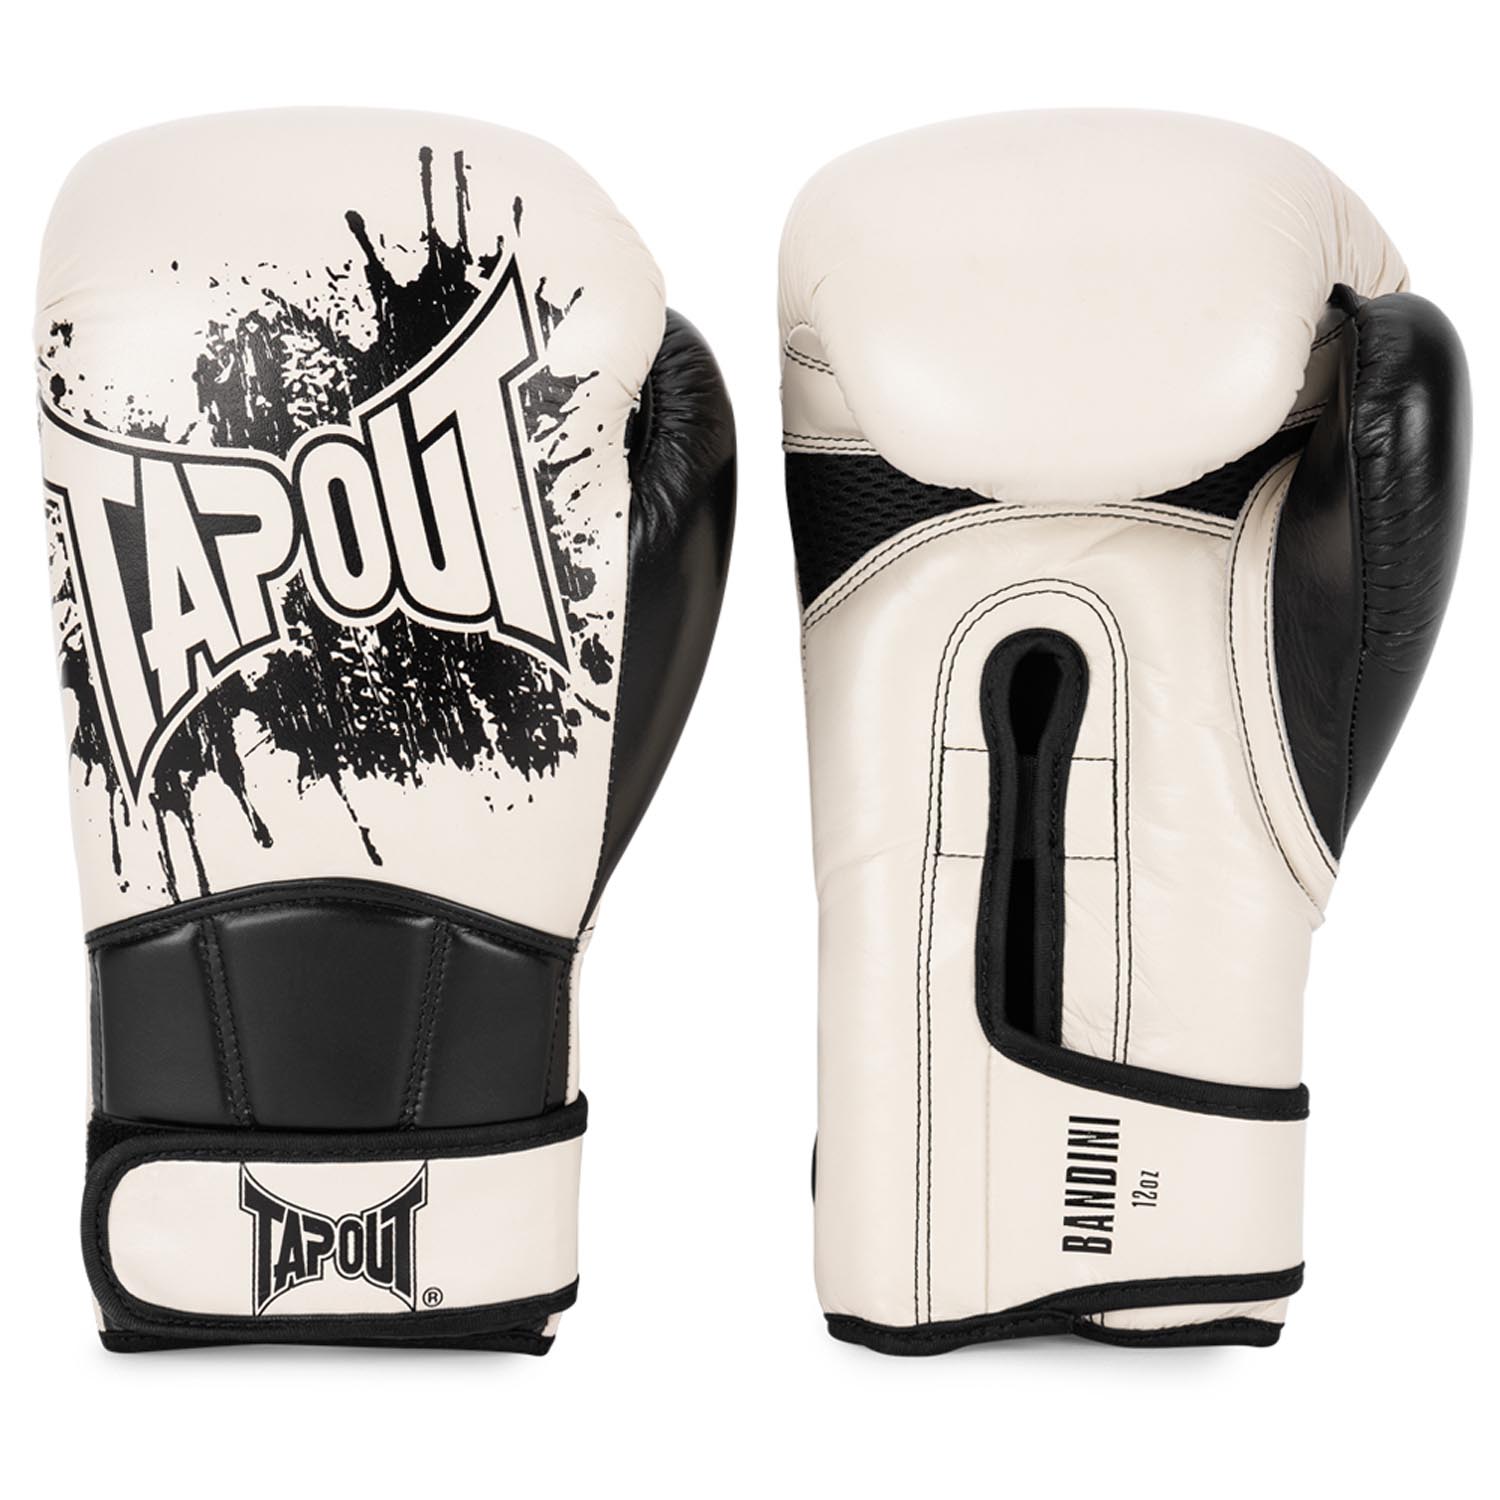 Tapout Boxhandschuhe, Bandini, 14 Oz